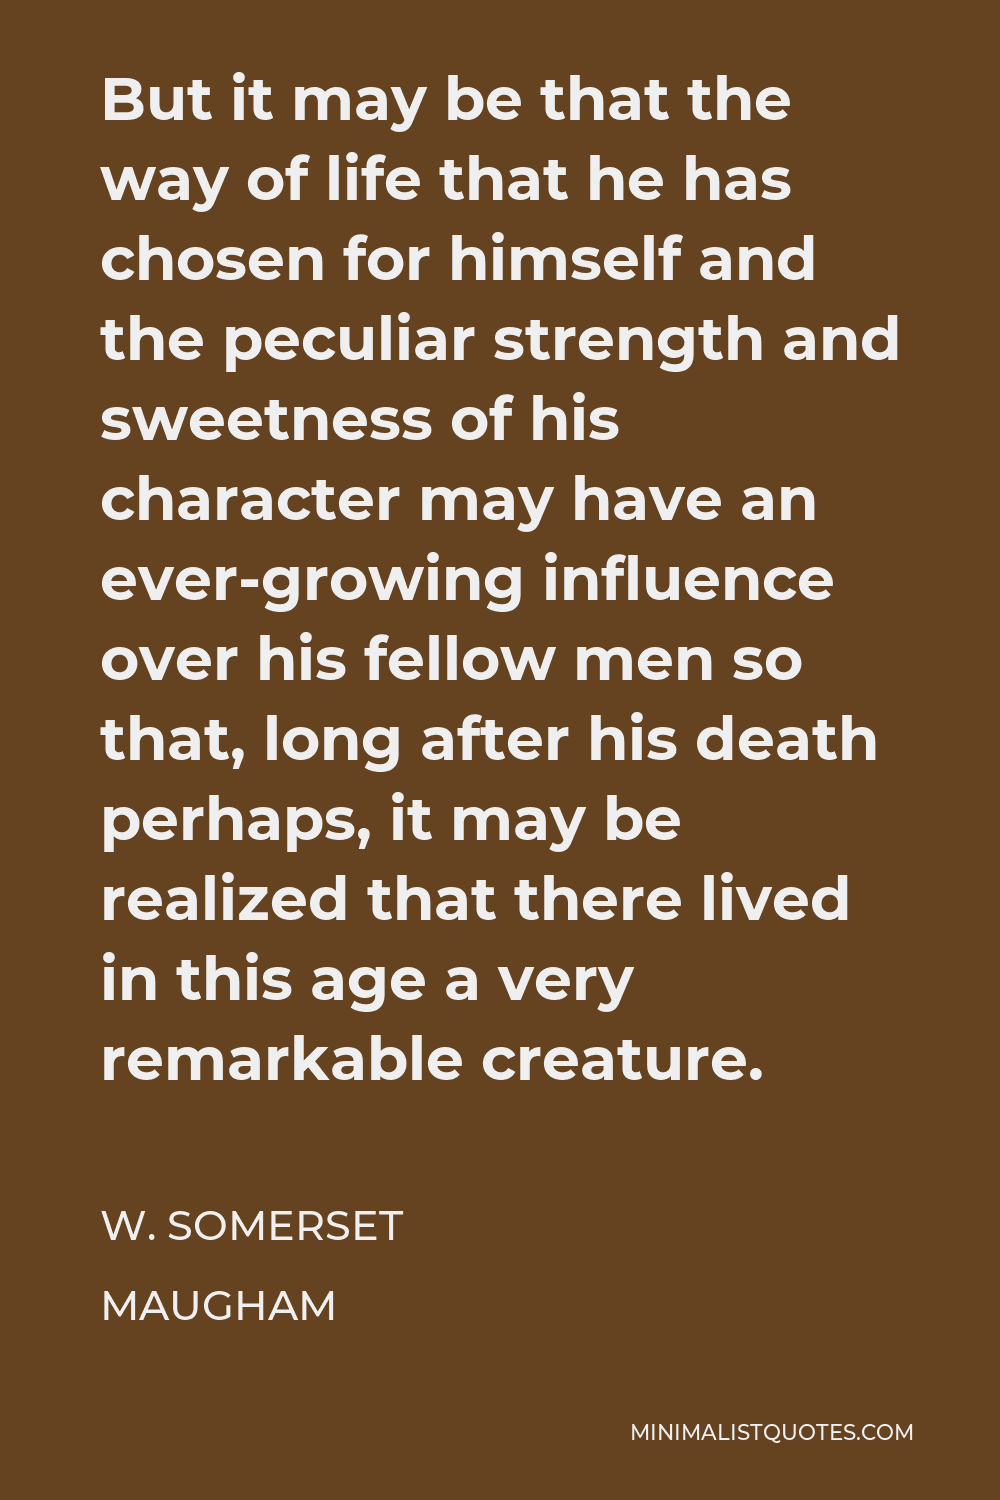 W. Somerset Maugham Quote - But it may be that the way of life that he has chosen for himself and the peculiar strength and sweetness of his character may have an ever-growing influence over his fellow men so that, long after his death perhaps, it may be realized that there lived in this age a very remarkable creature.